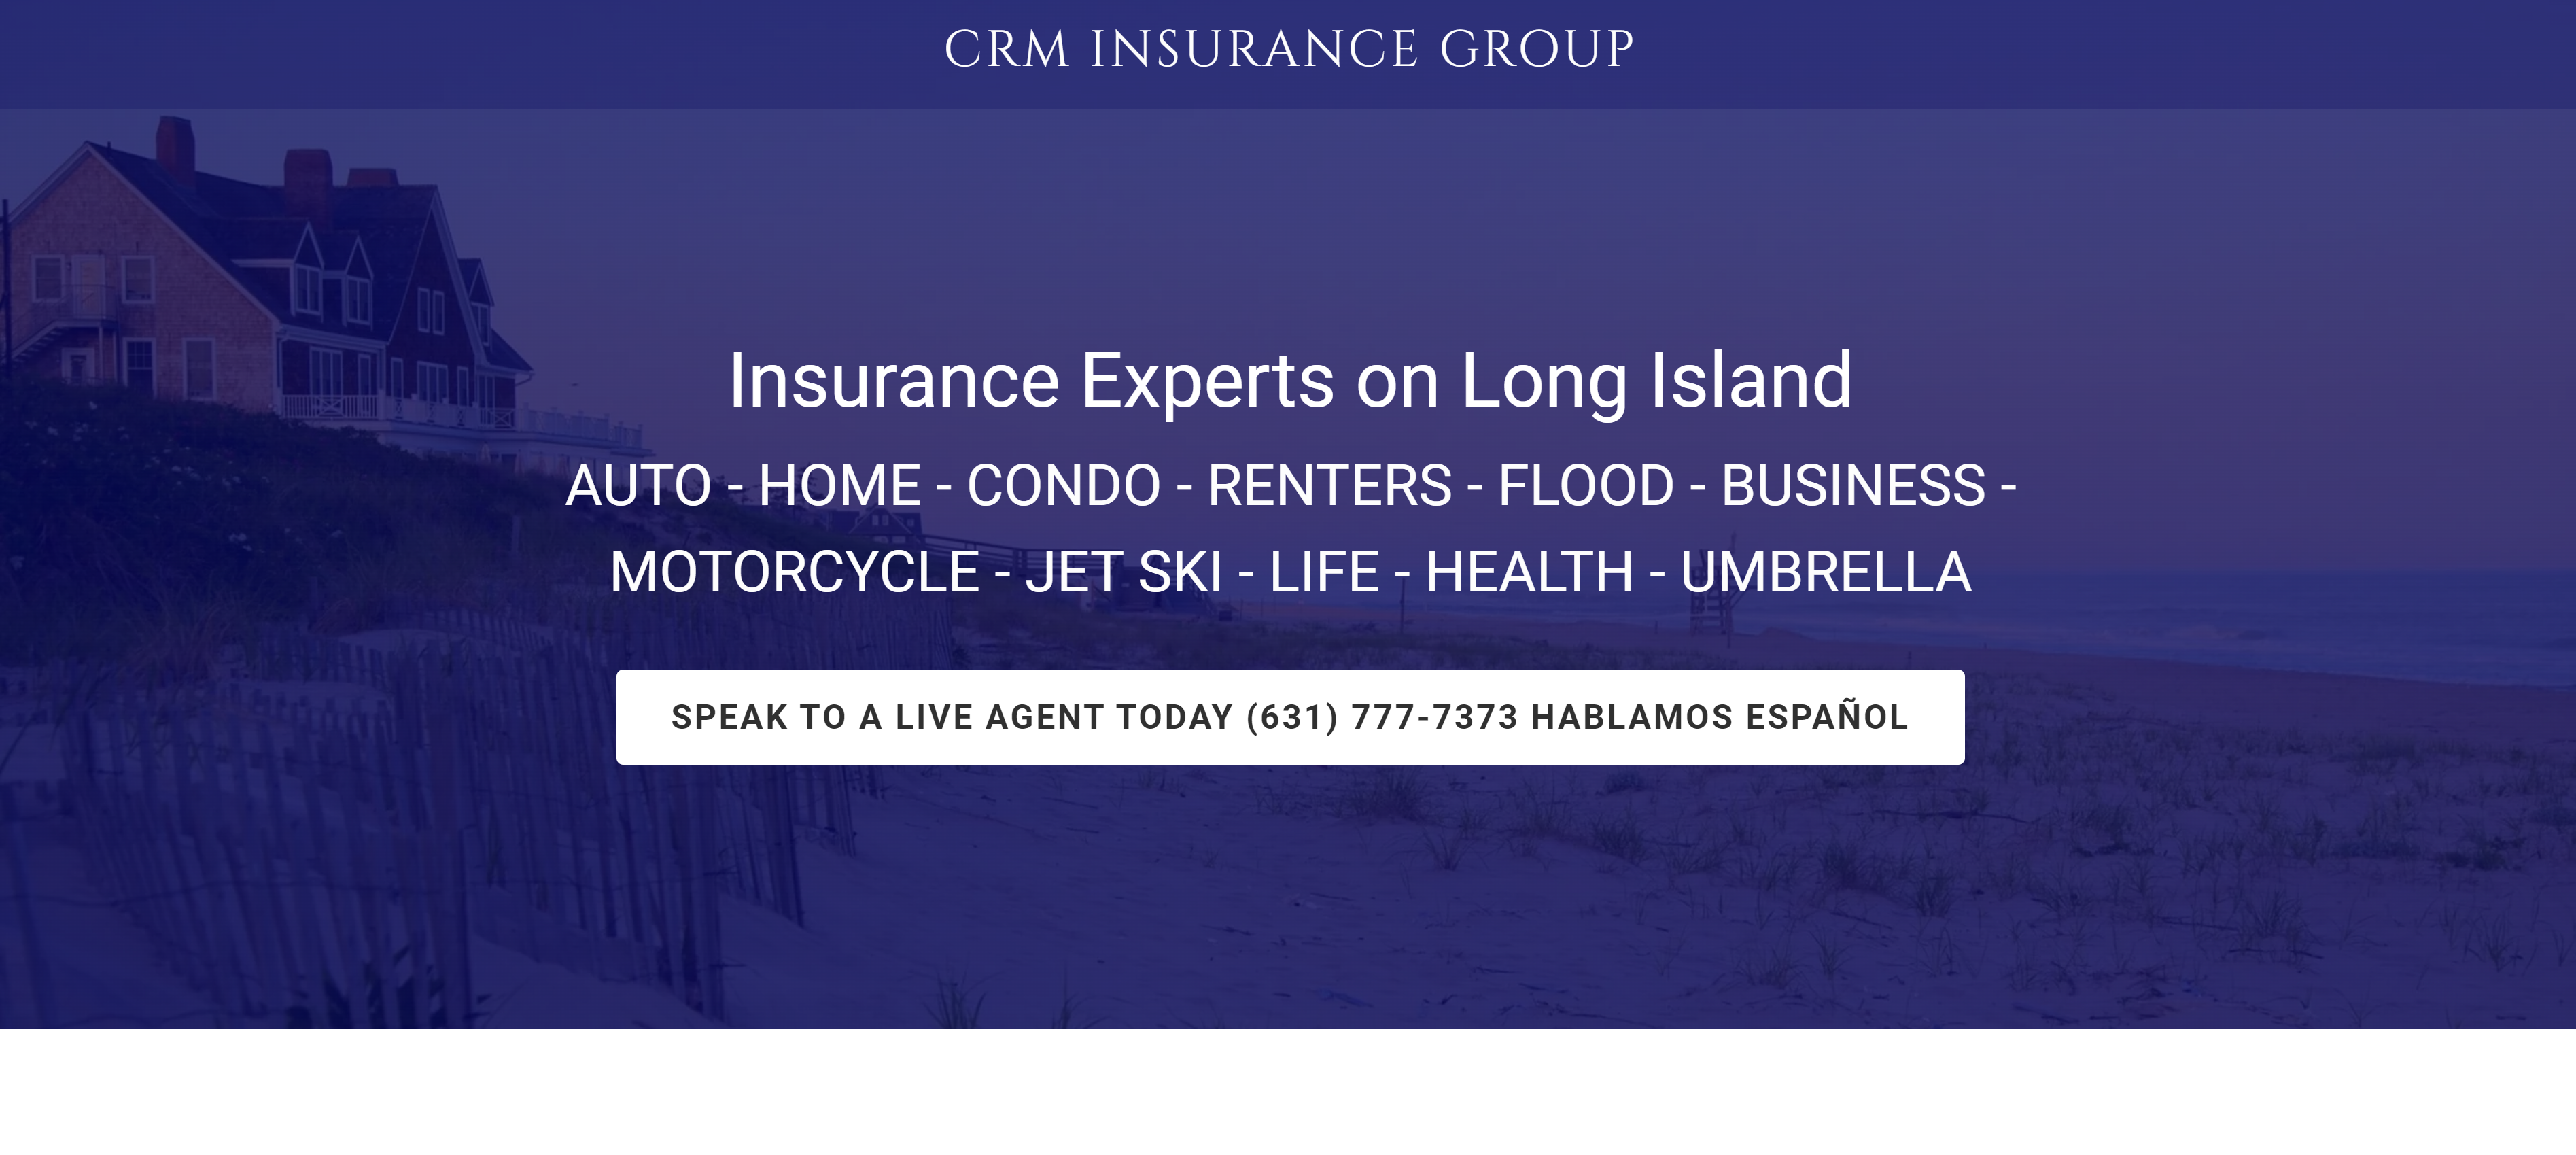 CRM Insurance Group